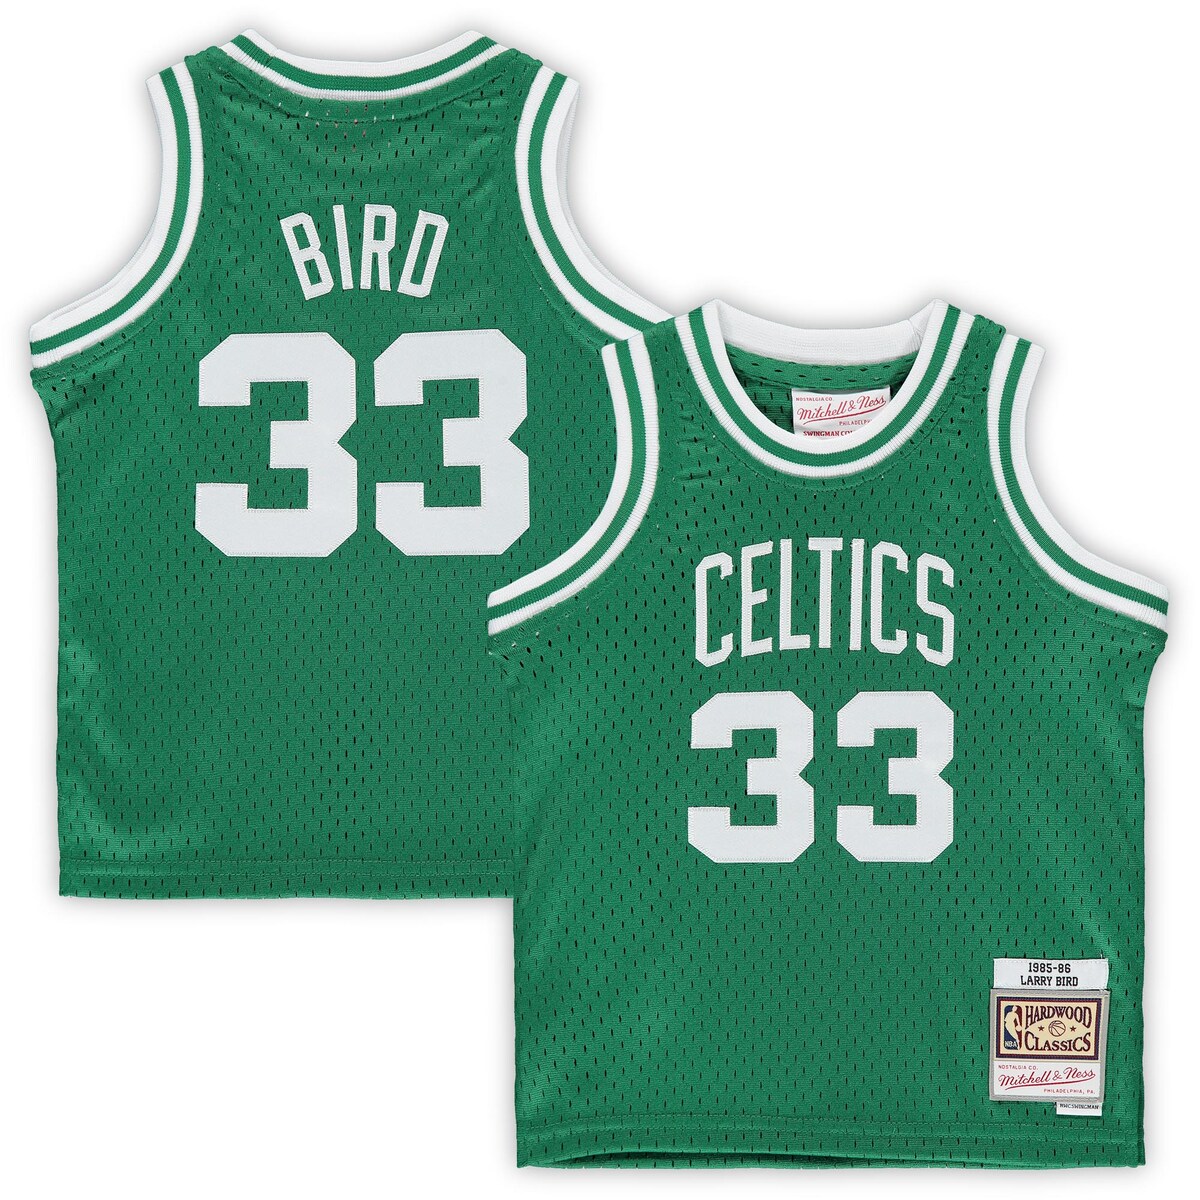 Introduce your little one to a star from the Boston Celtics past with this Hardwood Classics Retired Player jersey from Mitchell & Ness. The old-school design features vintage Boston Celtics graphics that will take everyone back to when Larry Bird was one of the most electrifying talents in the NBA. This throwback Larry Bird jersey is also designed with mesh fabric for a lightweight feel.Officially licensedImportedMachine wash, tumble dry lowBrand: Mitchell & NessMaterial: 100% PolyesterHeat-sealed NBA logoReplica JerseyMesh fabricRib-knit collar and armholesSewn-on jock tag at bottom hemSide splits at waist hemSleevelessTackle twill applique graphics